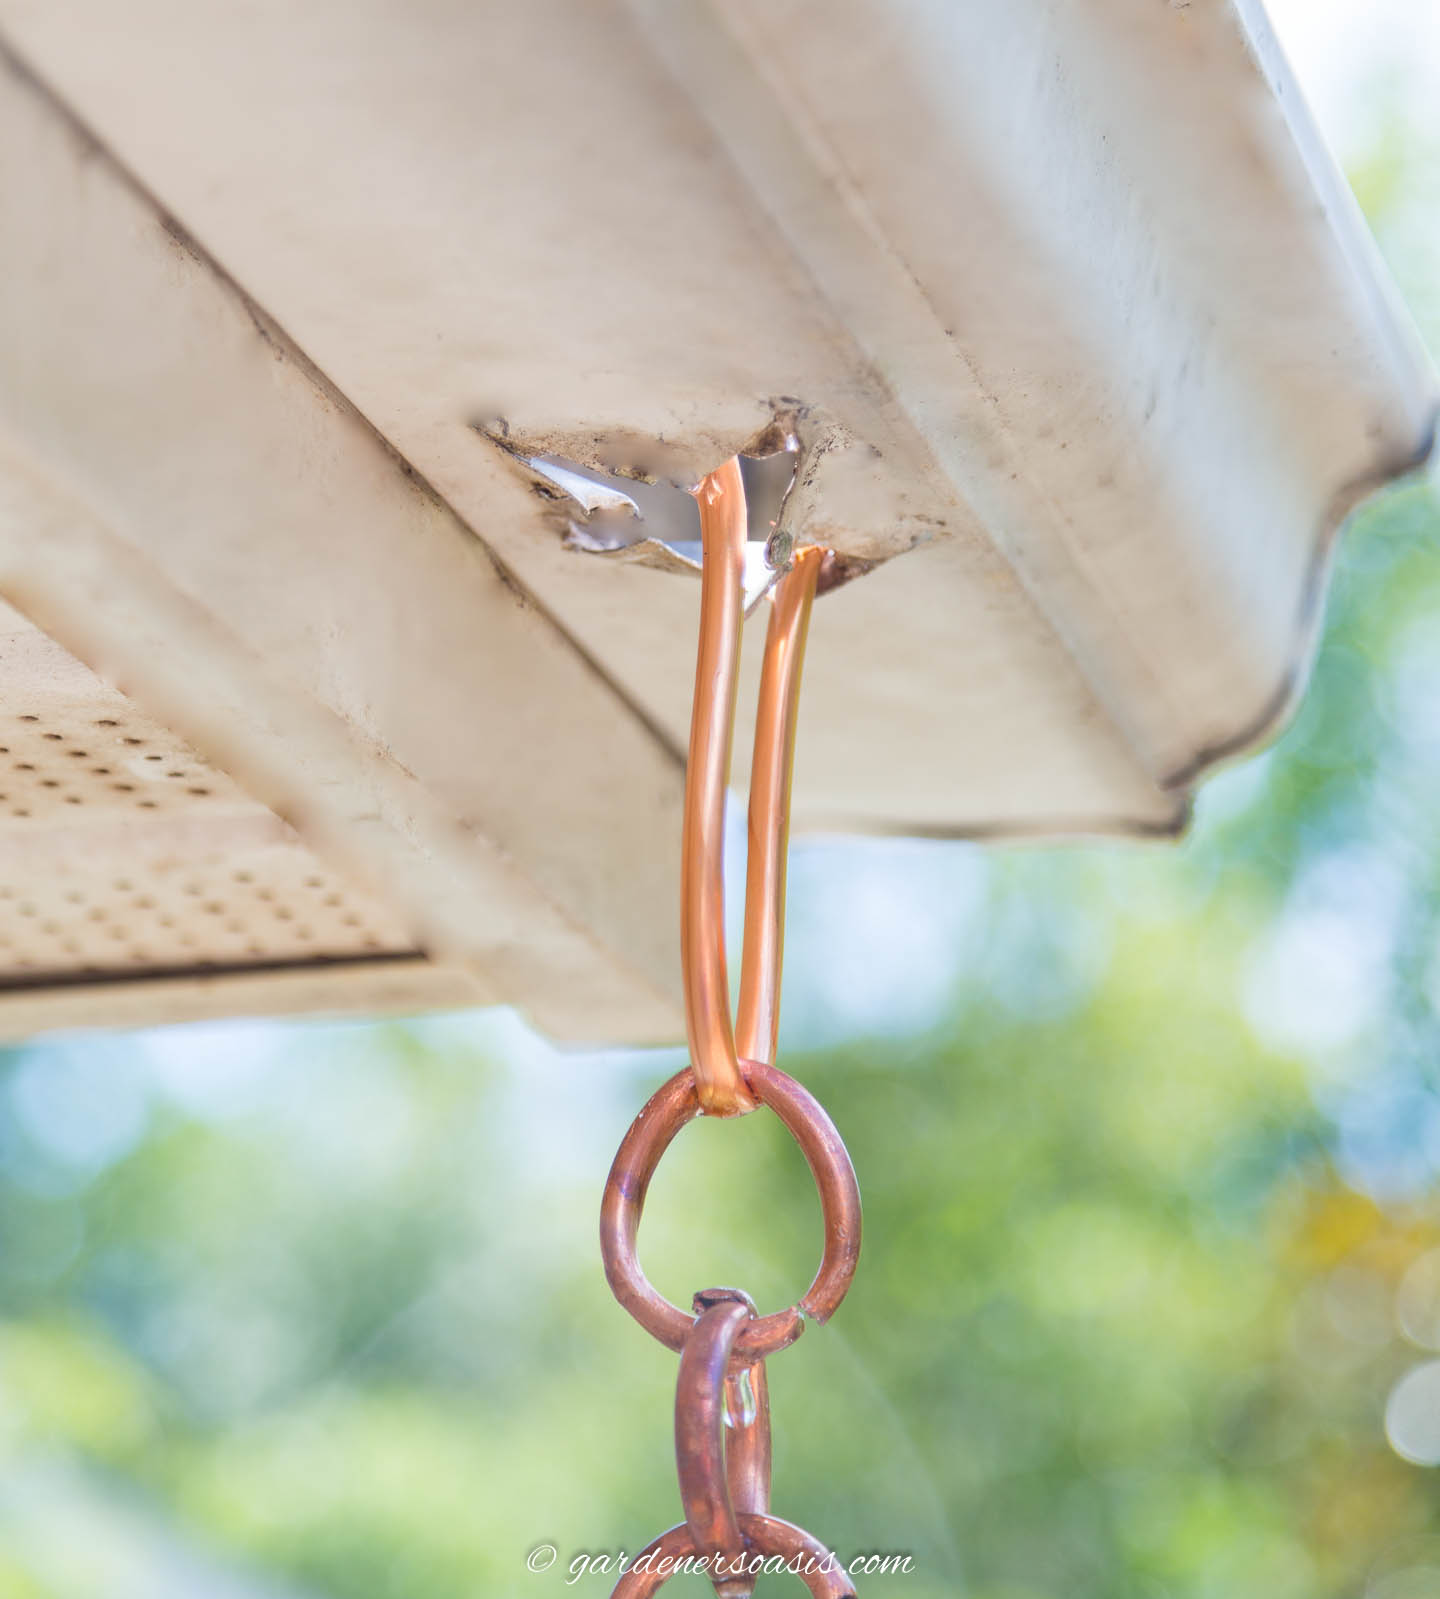 close up of a copper link rain chain hanging from a gutter with a v-hook gutter attachment